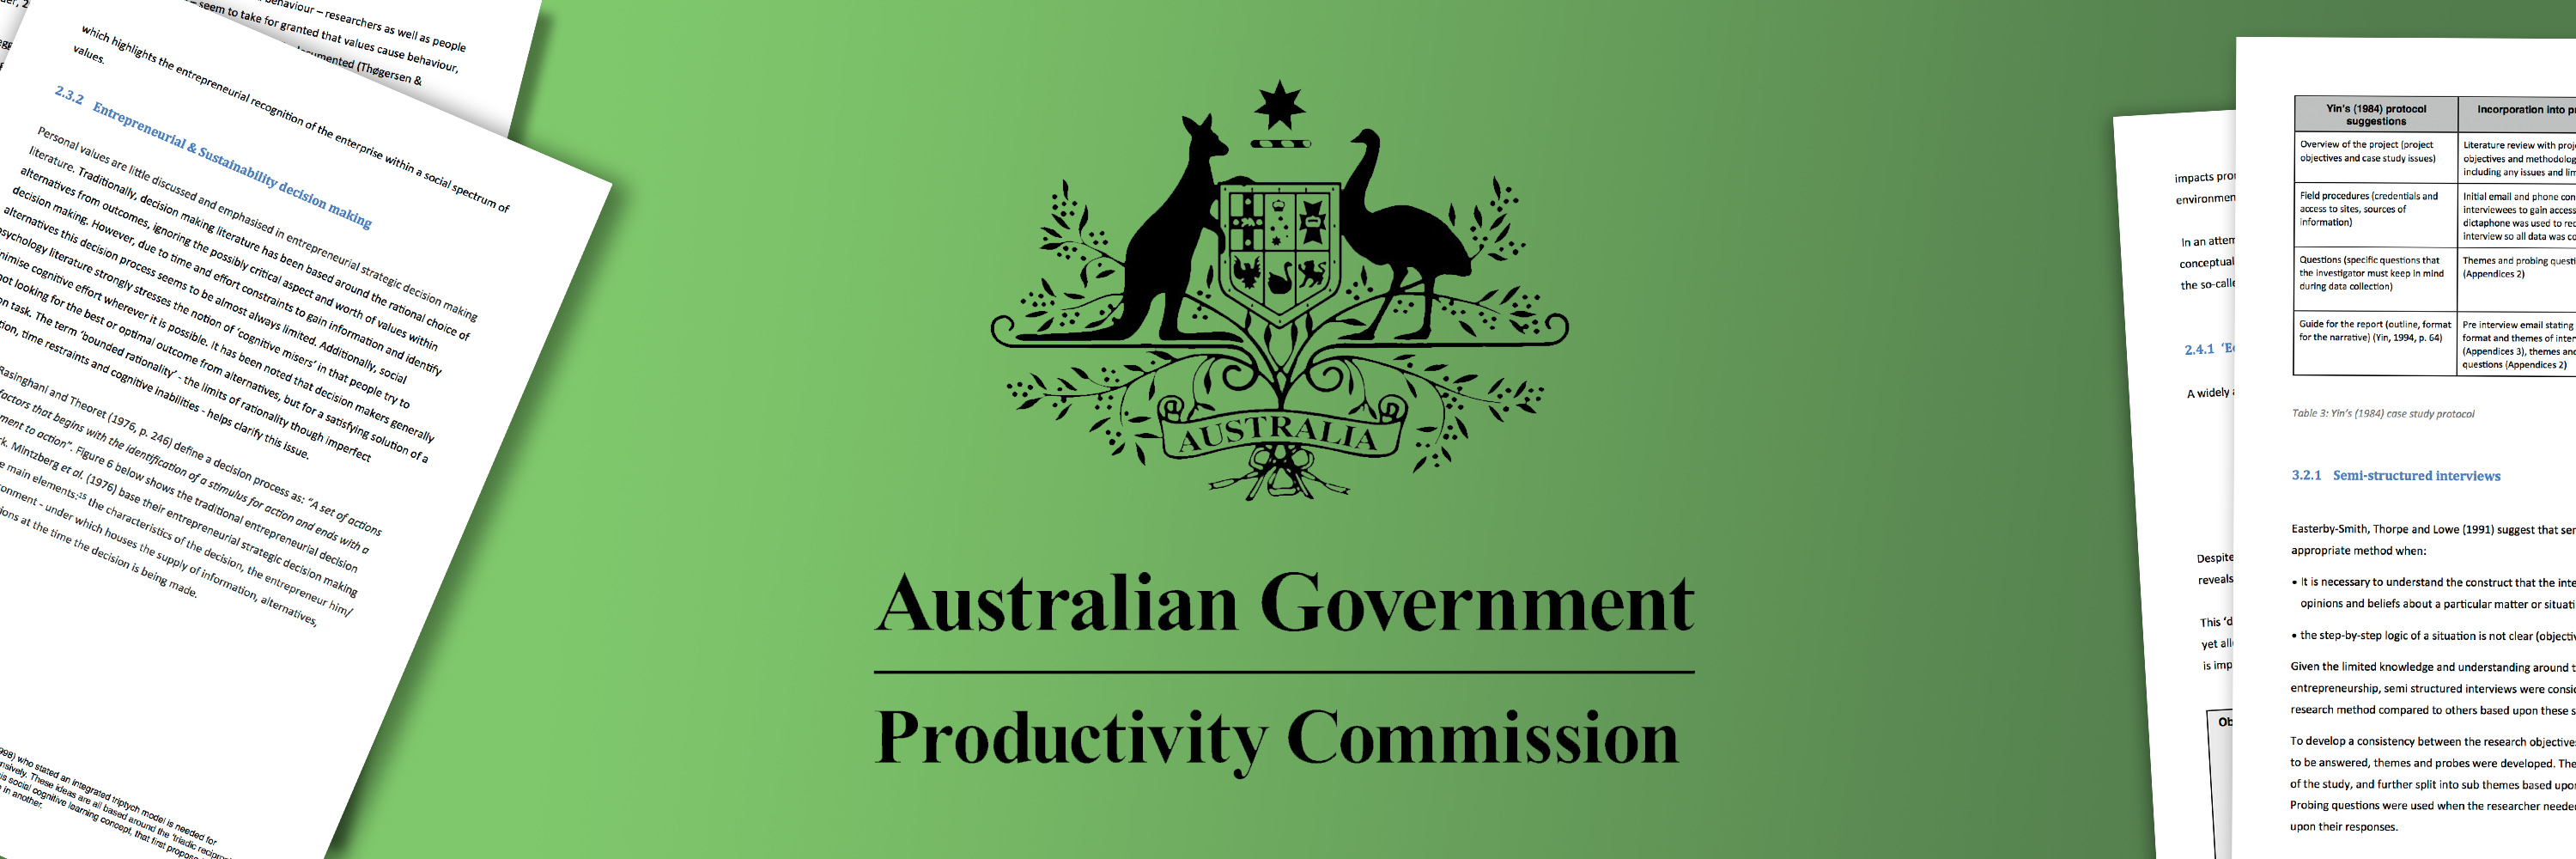 Productivity Commission recommends copyright relaxation in Australia